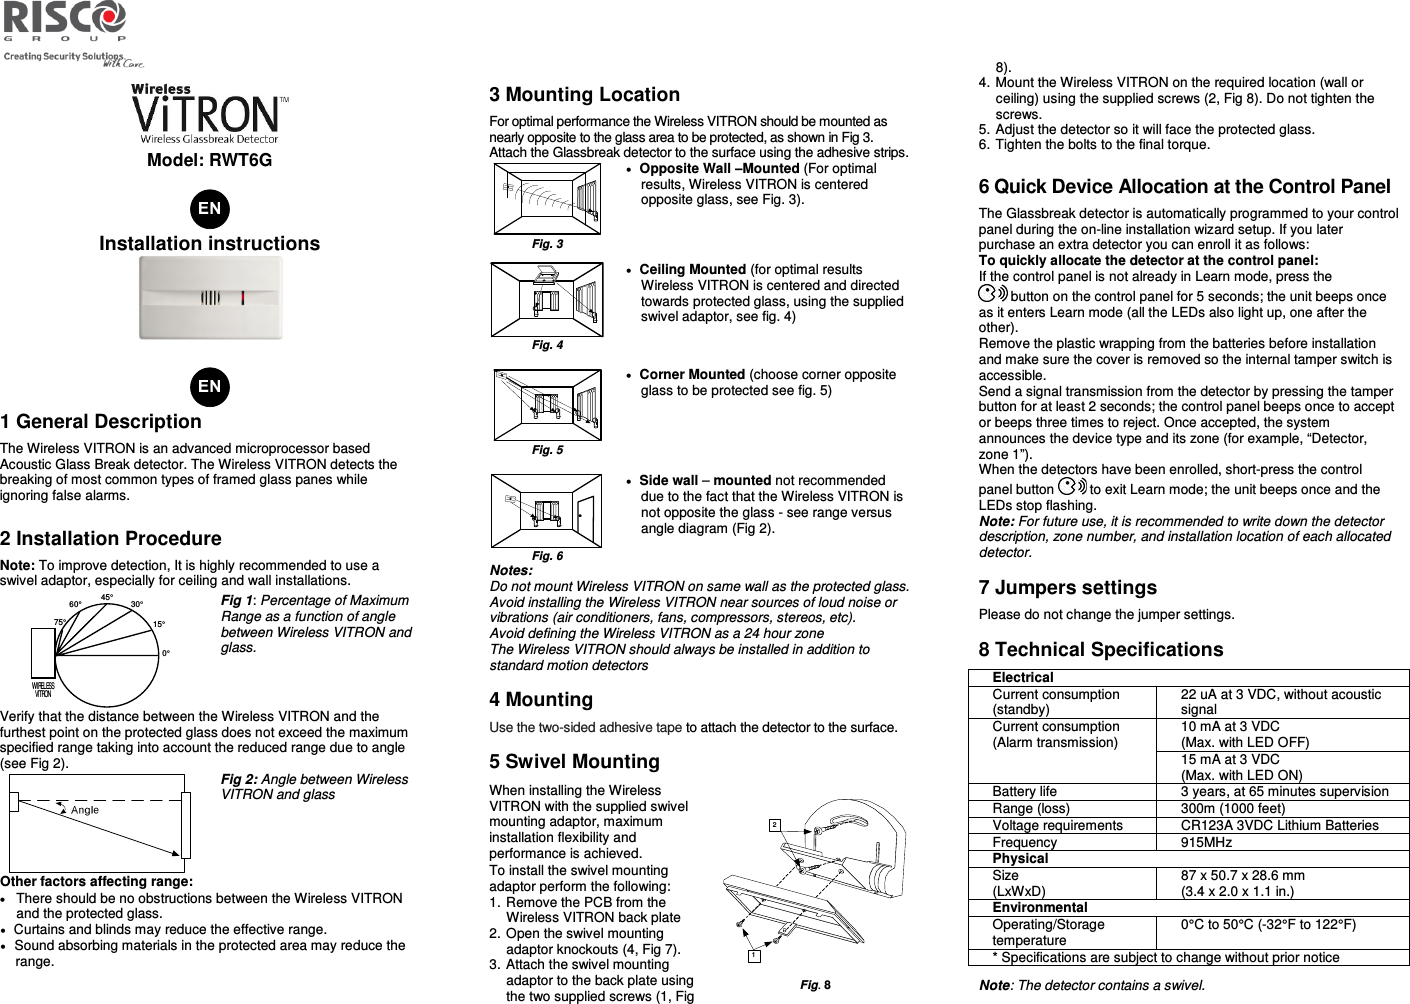   Model: RWT6G   Installation instructions   1 General Description The Wireless VITRON is an advanced microprocessor based Acoustic Glass Break detector. The Wireless VITRON detects the breaking of most common types of framed glass panes while ignoring false alarms. 2 Installation Procedure Note: To improve detection, It is highly recommended to use a swivel adaptor, especially for ceiling and wall installations.  Fig 1: Percentage of Maximum Range as a function of angle between Wireless VITRON and glass. Verify that the distance between the Wireless VITRON and the furthest point on the protected glass does not exceed the maximum specified range taking into account the reduced range due to angle (see Fig 2).  Fig 2: Angle between Wireless VITRON and glass Other factors affecting range: • There should be no obstructions between the Wireless VITRON and the protected glass. • Curtains and blinds may reduce the effective range. • Sound absorbing materials in the protected area may reduce the range. 3 Mounting Location For optimal performance the Wireless VITRON should be mounted as nearly opposite to the glass area to be protected, as shown in Fig 3. Attach the Glassbreak detector to the surface using the adhesive strips.  Fig. 3 • Opposite Wall –Mounted (For optimal results, Wireless VITRON is centered opposite glass, see Fig. 3).     Fig. 4 • Ceiling Mounted (for optimal results Wireless VITRON is centered and directed towards protected glass, using the supplied swivel adaptor, see fig. 4)    Fig. 5 • Corner Mounted (choose corner opposite glass to be protected see fig. 5)     Fig. 6 • Side wall – mounted not recommended due to the fact that the Wireless VITRON is not opposite the glass - see range versus angle diagram (Fig 2).  Notes: Do not mount Wireless VITRON on same wall as the protected glass.  Avoid installing the Wireless VITRON near sources of loud noise or vibrations (air conditioners, fans, compressors, stereos, etc). Avoid defining the Wireless VITRON as a 24 hour zone The Wireless VITRON should always be installed in addition to standard motion detectors 4 Mounting Use the two-sided adhesive tape to attach the detector to the surface. 5 Swivel Mounting When installing the Wireless VITRON with the supplied swivel mounting adaptor, maximum installation flexibility and performance is achieved. To install the swivel mounting adaptor perform the following: 1. Remove the PCB from the Wireless VITRON back plate 2. Open the swivel mounting adaptor knockouts (4, Fig 7). 3. Attach the swivel mounting adaptor to the back plate using the two supplied screws (1, Fig  Fig. 8 8). 4. Mount the Wireless VITRON on the required location (wall or ceiling) using the supplied screws (2, Fig 8). Do not tighten the screws.  5. Adjust the detector so it will face the protected glass.  6. Tighten the bolts to the final torque.  6 Quick Device Allocation at the Control Panel The Glassbreak detector is automatically programmed to your control panel during the on-line installation wizard setup. If you later purchase an extra detector you can enroll it as follows:  To quickly allocate the detector at the control panel: If the control panel is not already in Learn mode, press the  button on the control panel for 5 seconds; the unit beeps once as it enters Learn mode (all the LEDs also light up, one after the other).  Remove the plastic wrapping from the batteries before installation and make sure the cover is removed so the internal tamper switch is accessible.  Send a signal transmission from the detector by pressing the tamper button for at least 2 seconds; the control panel beeps once to accept or beeps three times to reject. Once accepted, the system announces the device type and its zone (for example, “Detector, zone 1”).  When the detectors have been enrolled, short-press the control panel button   to exit Learn mode; the unit beeps once and the LEDs stop flashing. Note: For future use, it is recommended to write down the detector description, zone number, and installation location of each allocated detector. 7 Jumpers settings Please do not change the jumper settings. 8 Technical Specifications Electrical Current consumption (standby) 22 uA at 3 VDC, without acoustic signal   Current consumption (Alarm transmission) 10 mA at 3 VDC  (Max. with LED OFF) 15 mA at 3 VDC  (Max. with LED ON) Battery life 3 years, at 65 minutes supervision  Range (loss)  300m (1000 feet) Voltage requirements  CR123A 3VDC Lithium Batteries  Frequency  915MHz Physical Size  (LxWxD) 87 x 50.7 x 28.6 mm  (3.4 x 2.0 x 1.1 in.) Environmental Operating/Storage temperature 0°C to 50°C (-32°F to 122°F) * Specifications are subject to change without prior notice Note: The detector contains a swivel. 75°60°45°30°15°0°WIRELESSVITRON VITRON VITRONVITRON VITRON VITRONVITRONVITRON VITRON VITRON21